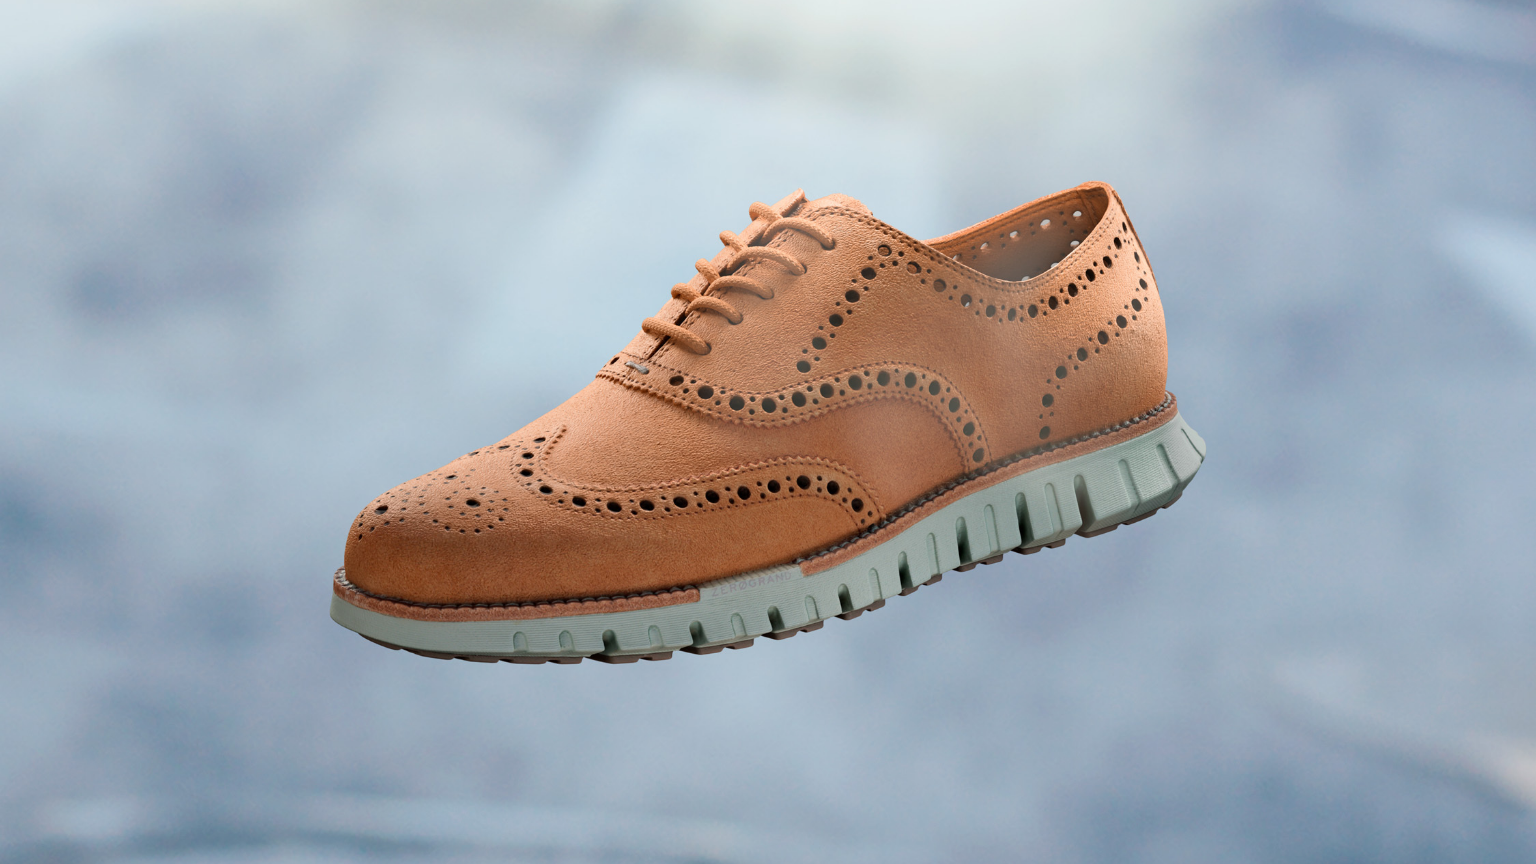 Zerogrand Remastered Oxford balancing on tip of shoe